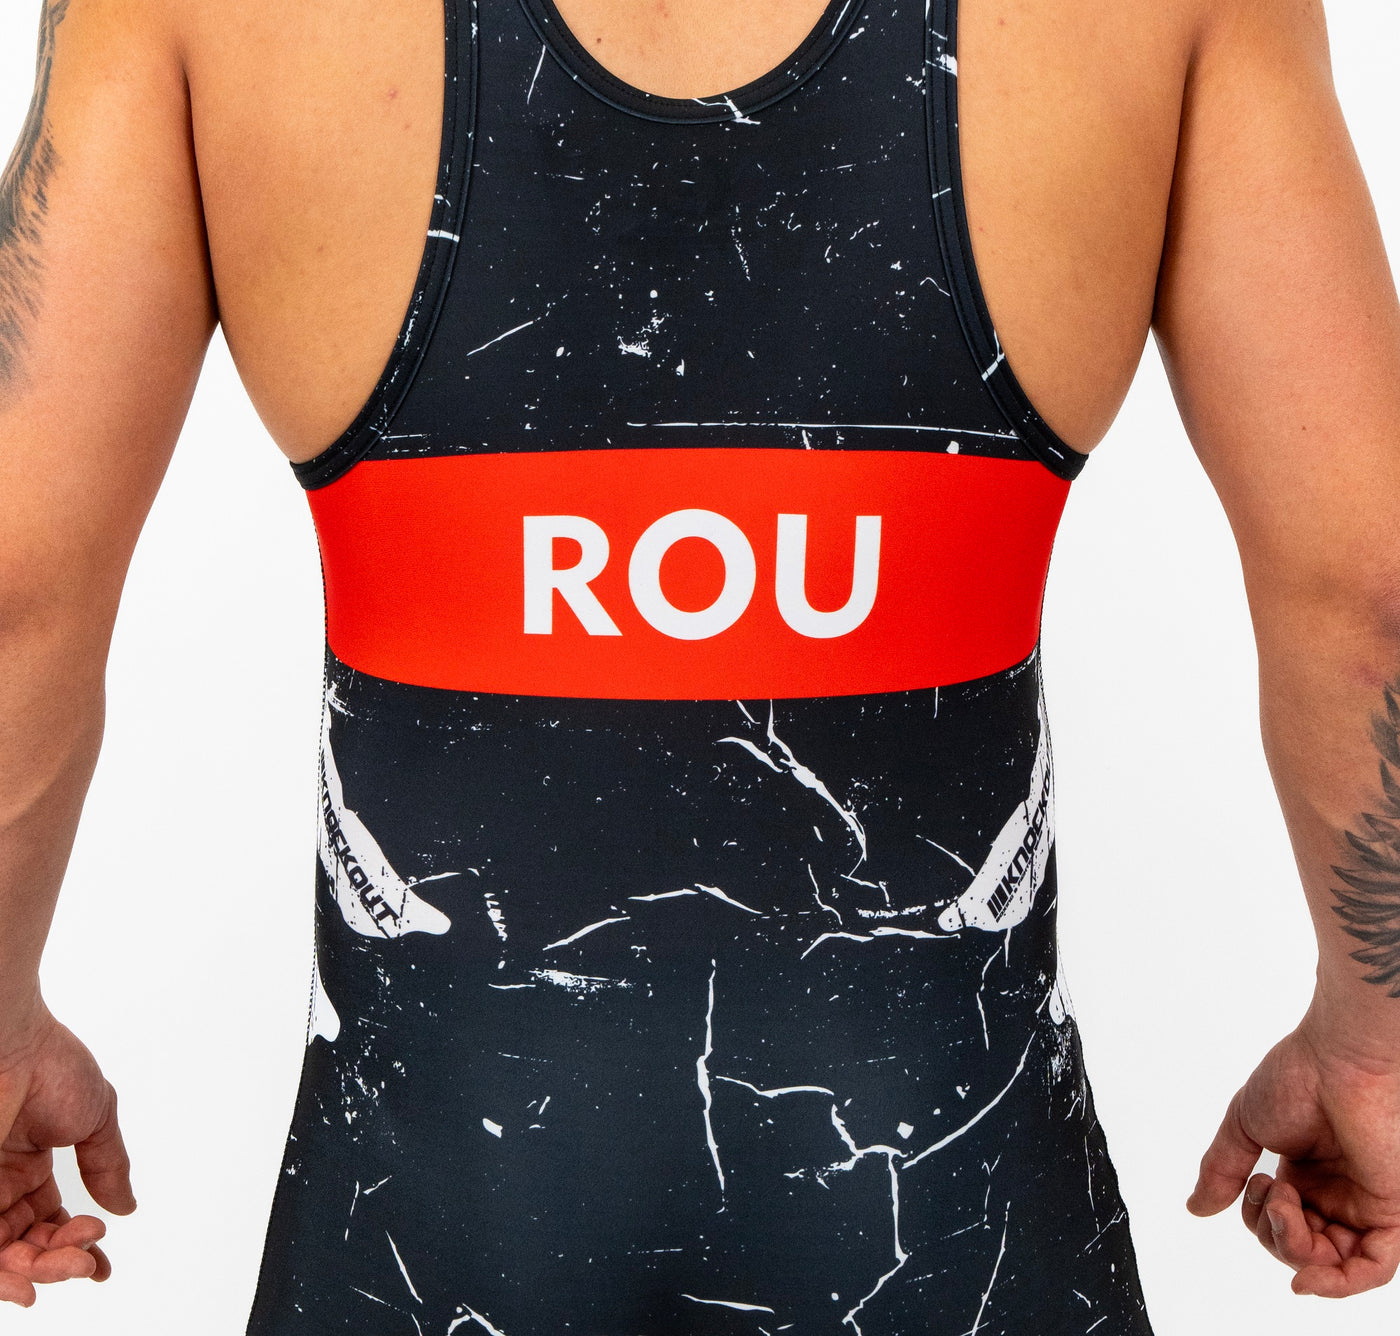 Dres Lupte Knockout Punisher | knock-out.ro